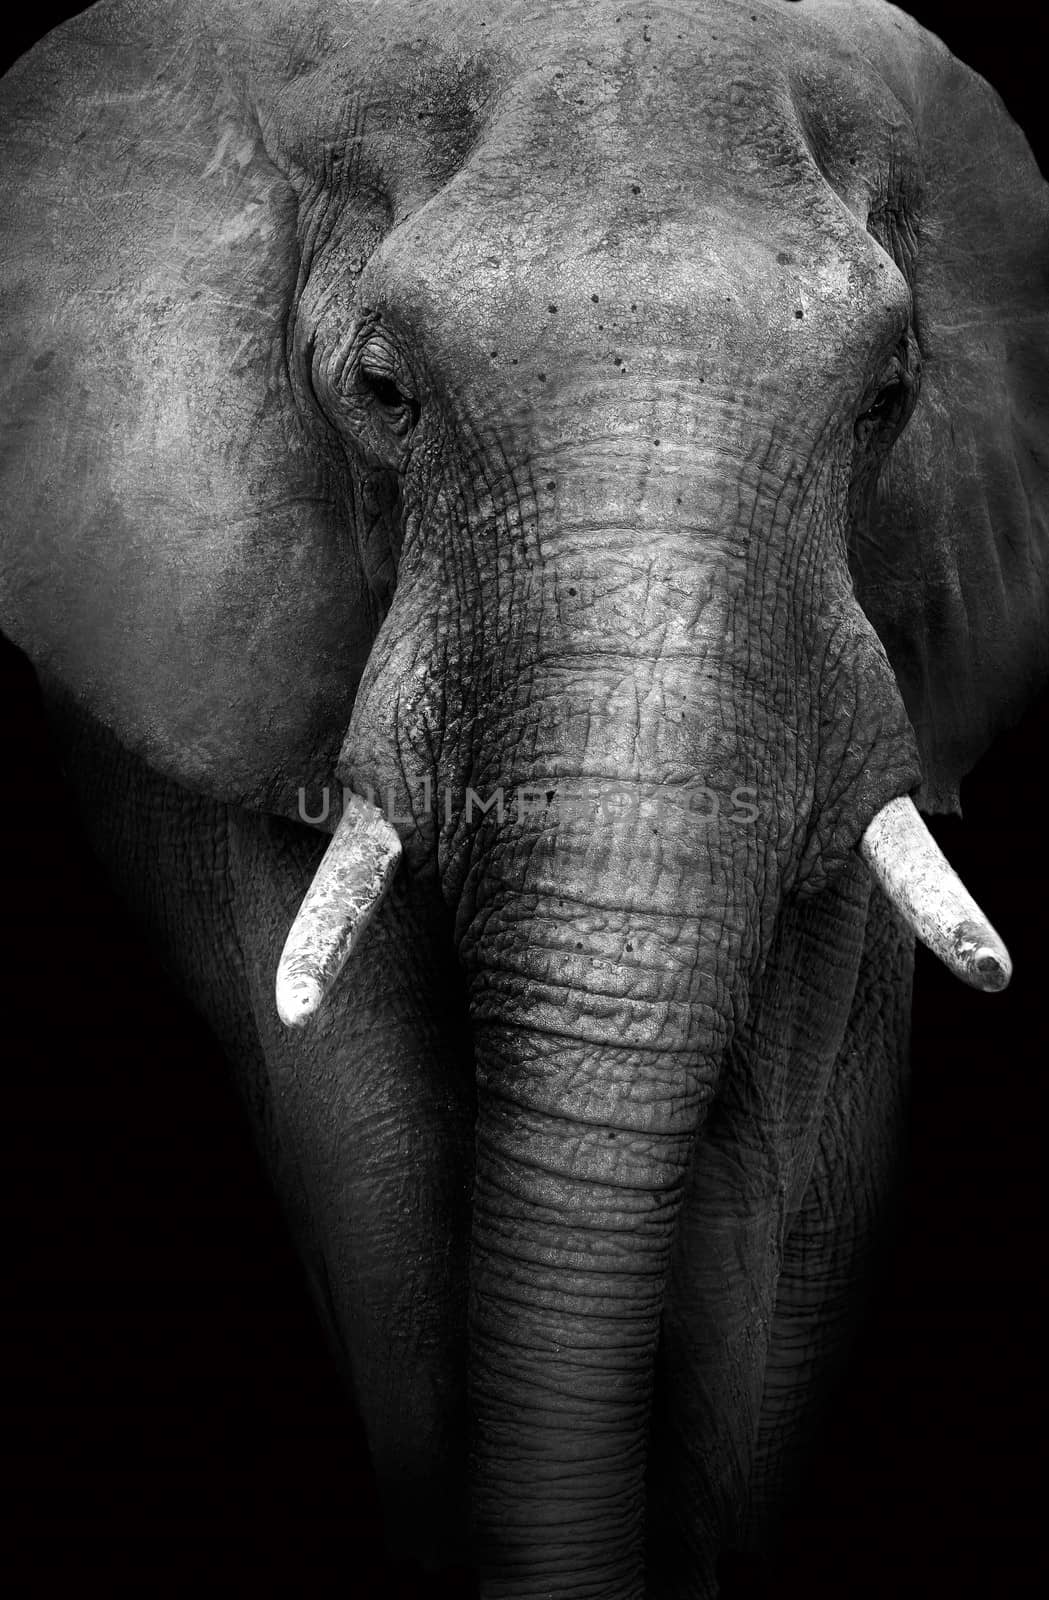 Artistic monochrome image of a wild African Elephant in low key